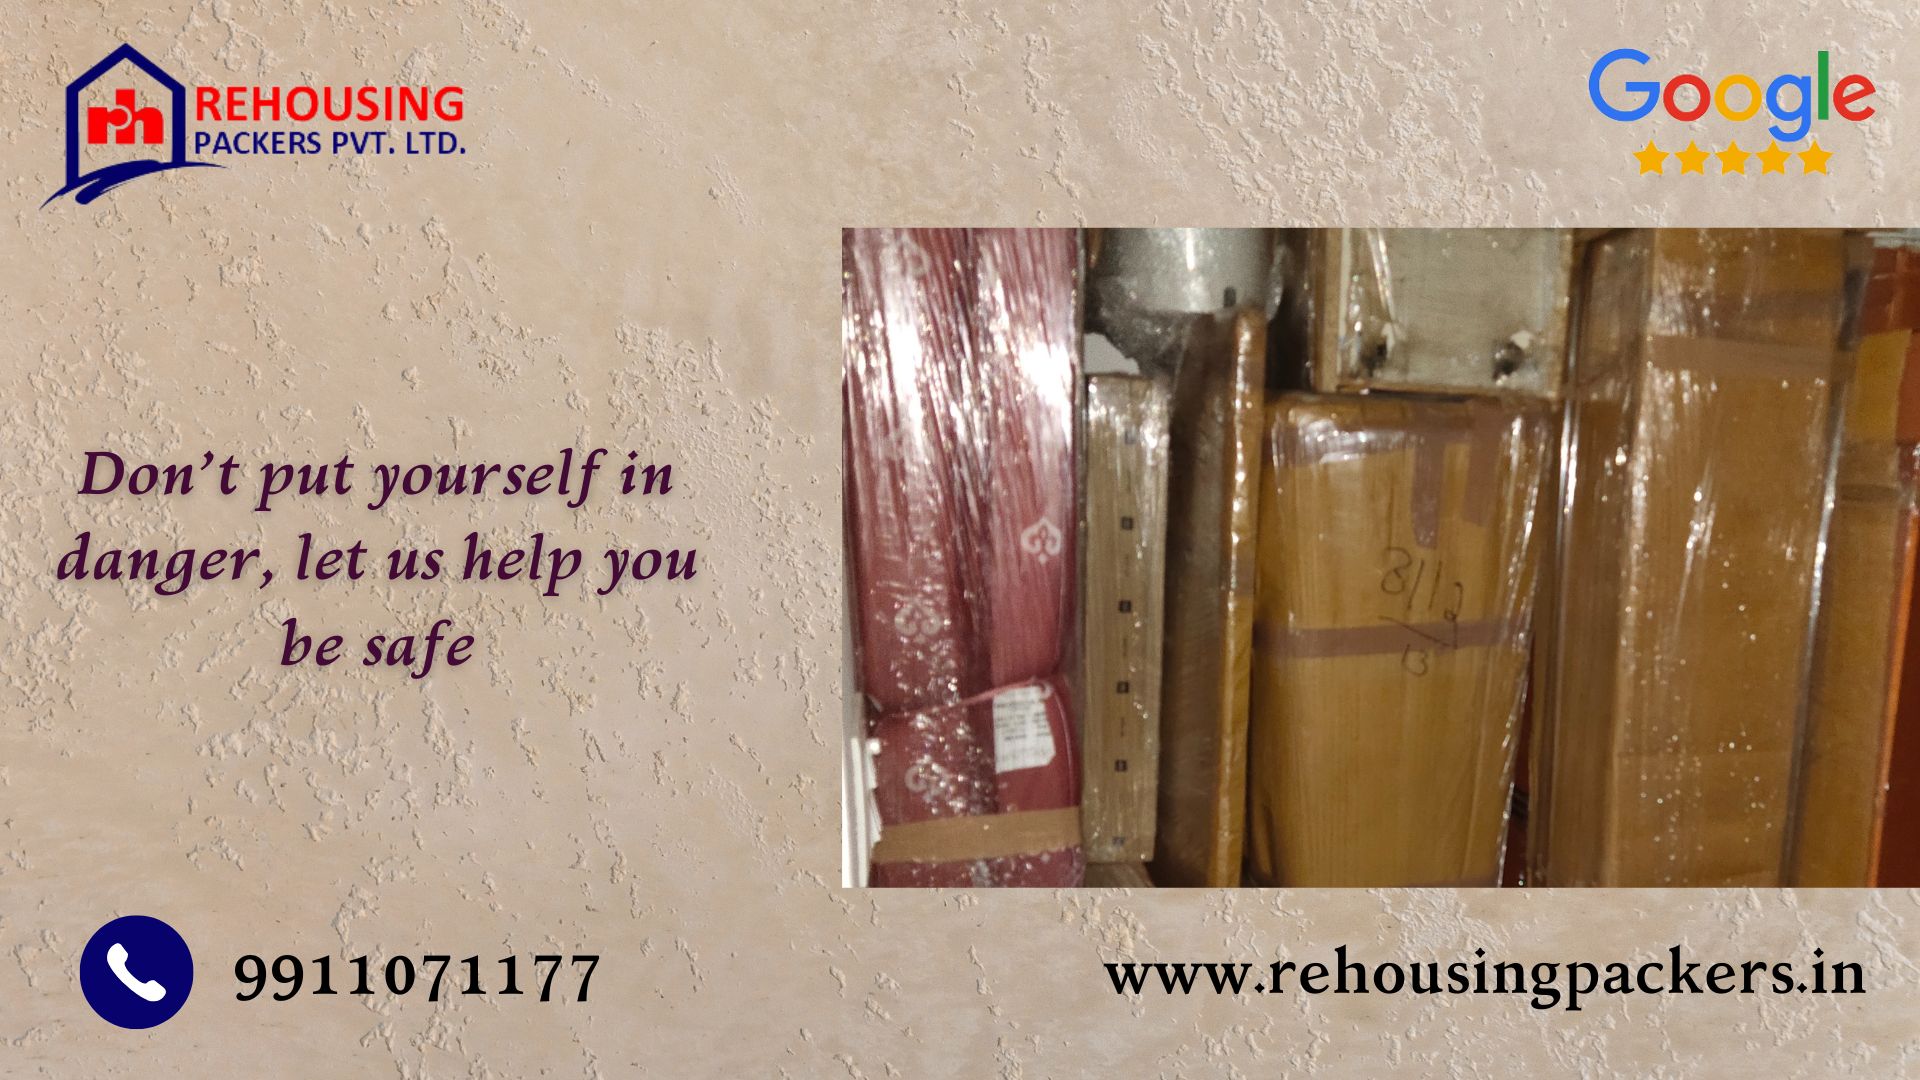 our self household storage services in Gurgaon